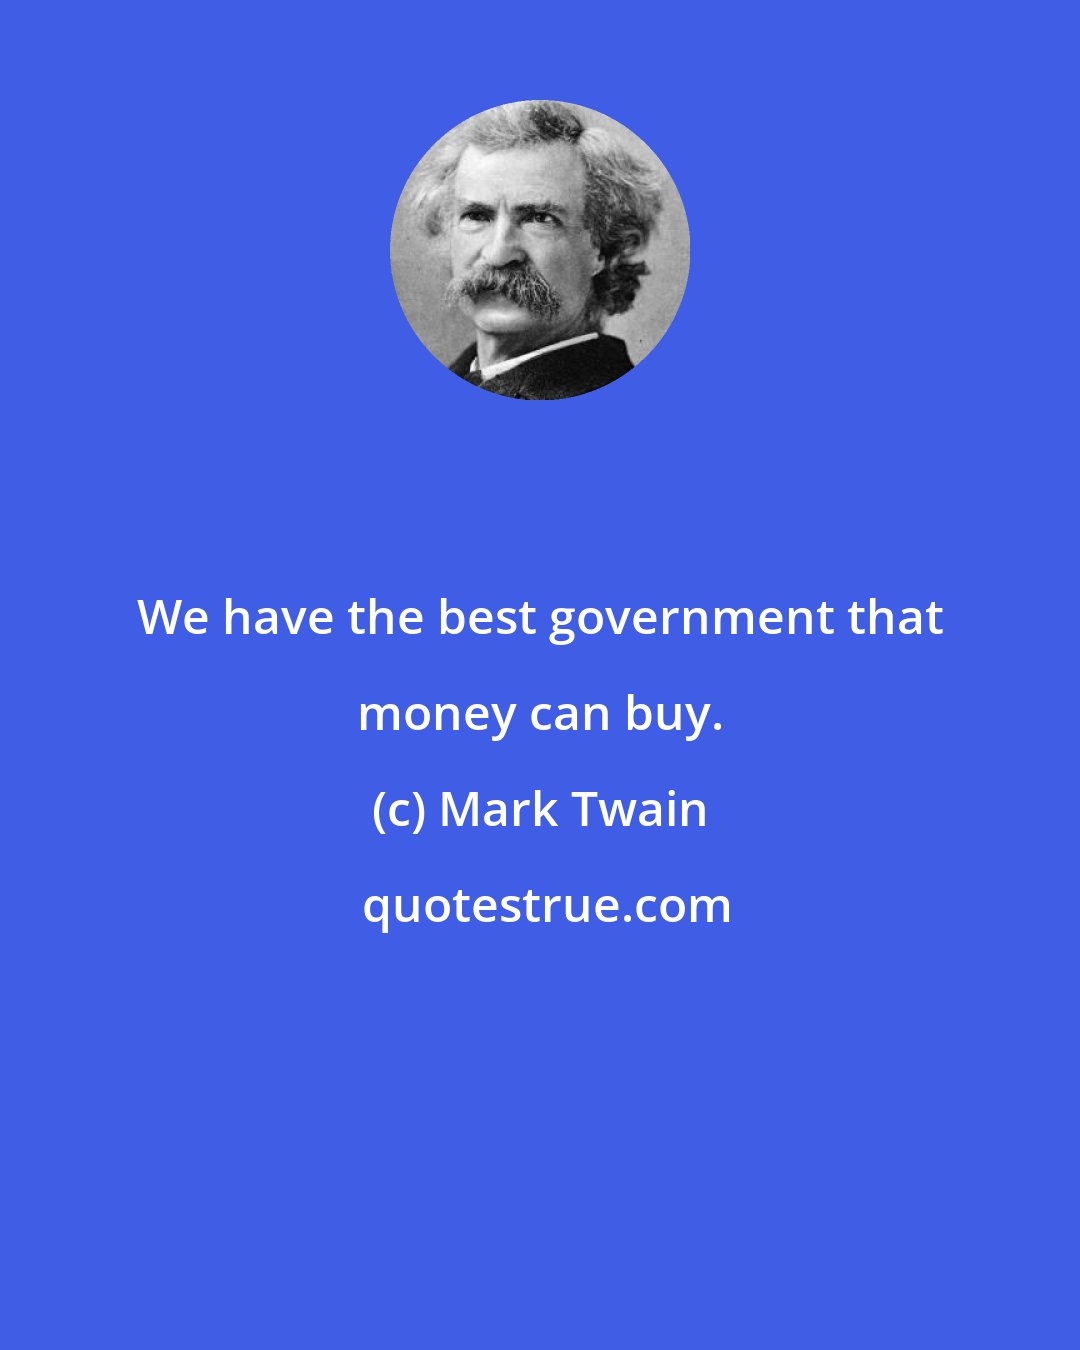 Mark Twain: We have the best government that money can buy.